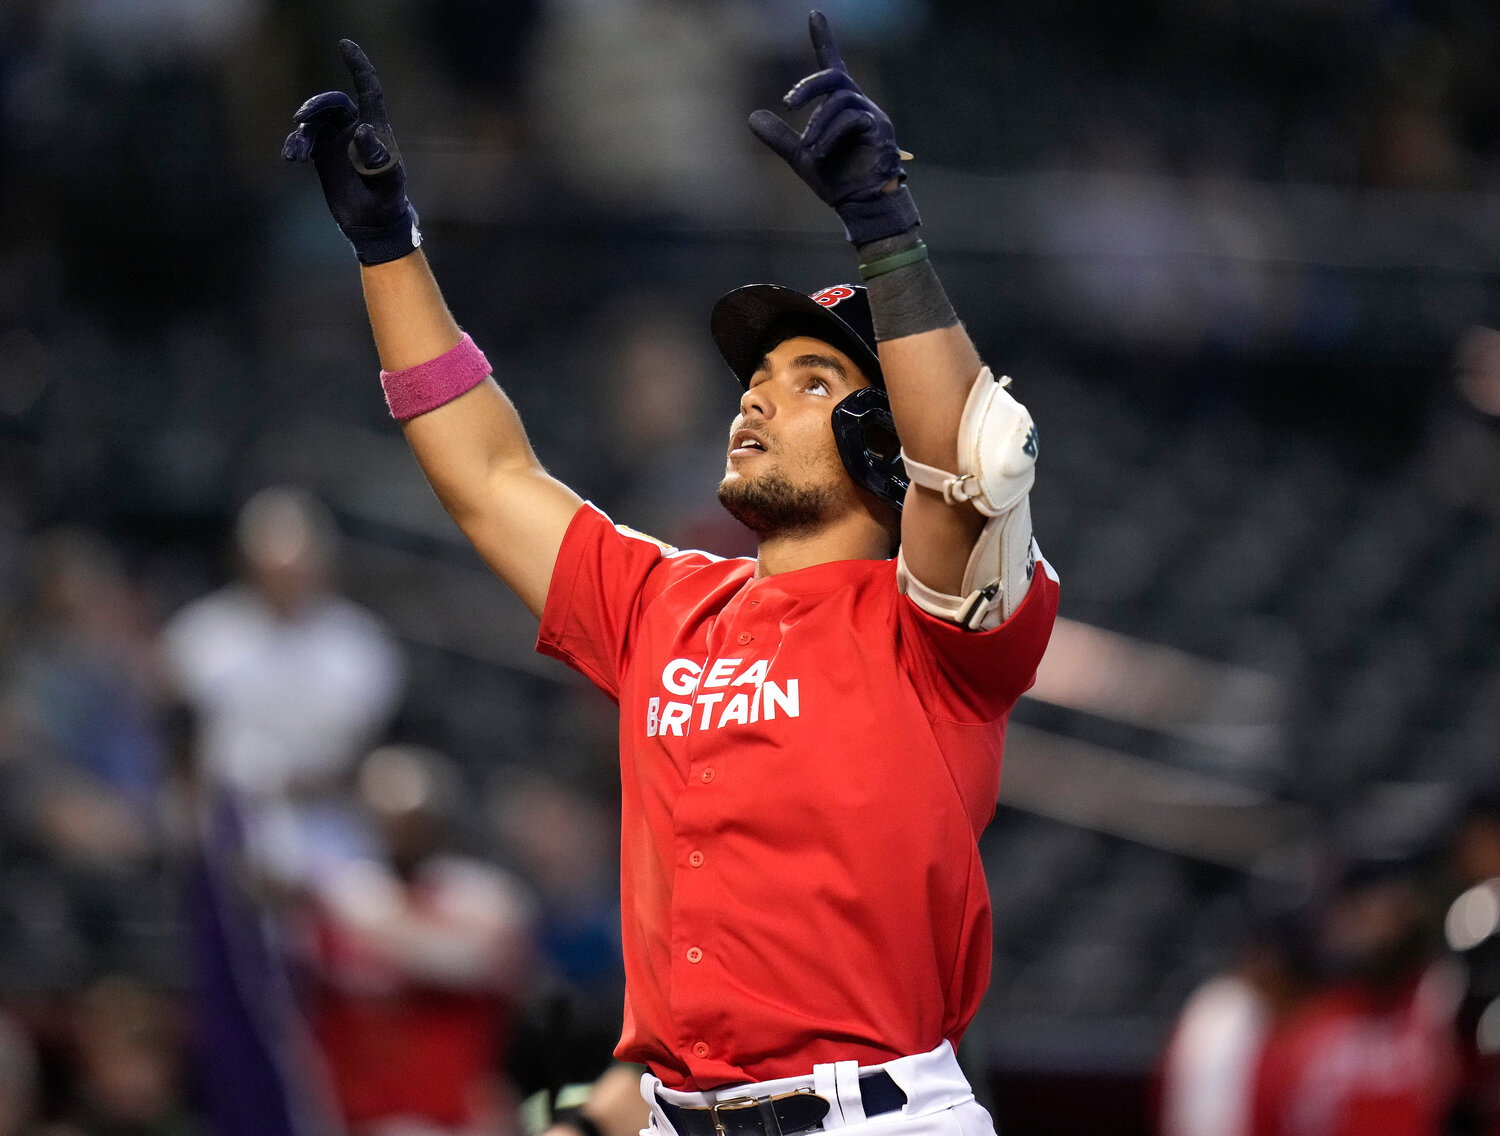 Great Britain's Harry Ford celebrates after hitting a solo home run against Colombia during the World Baseball Classic game in Phoenix March 13, 2023.